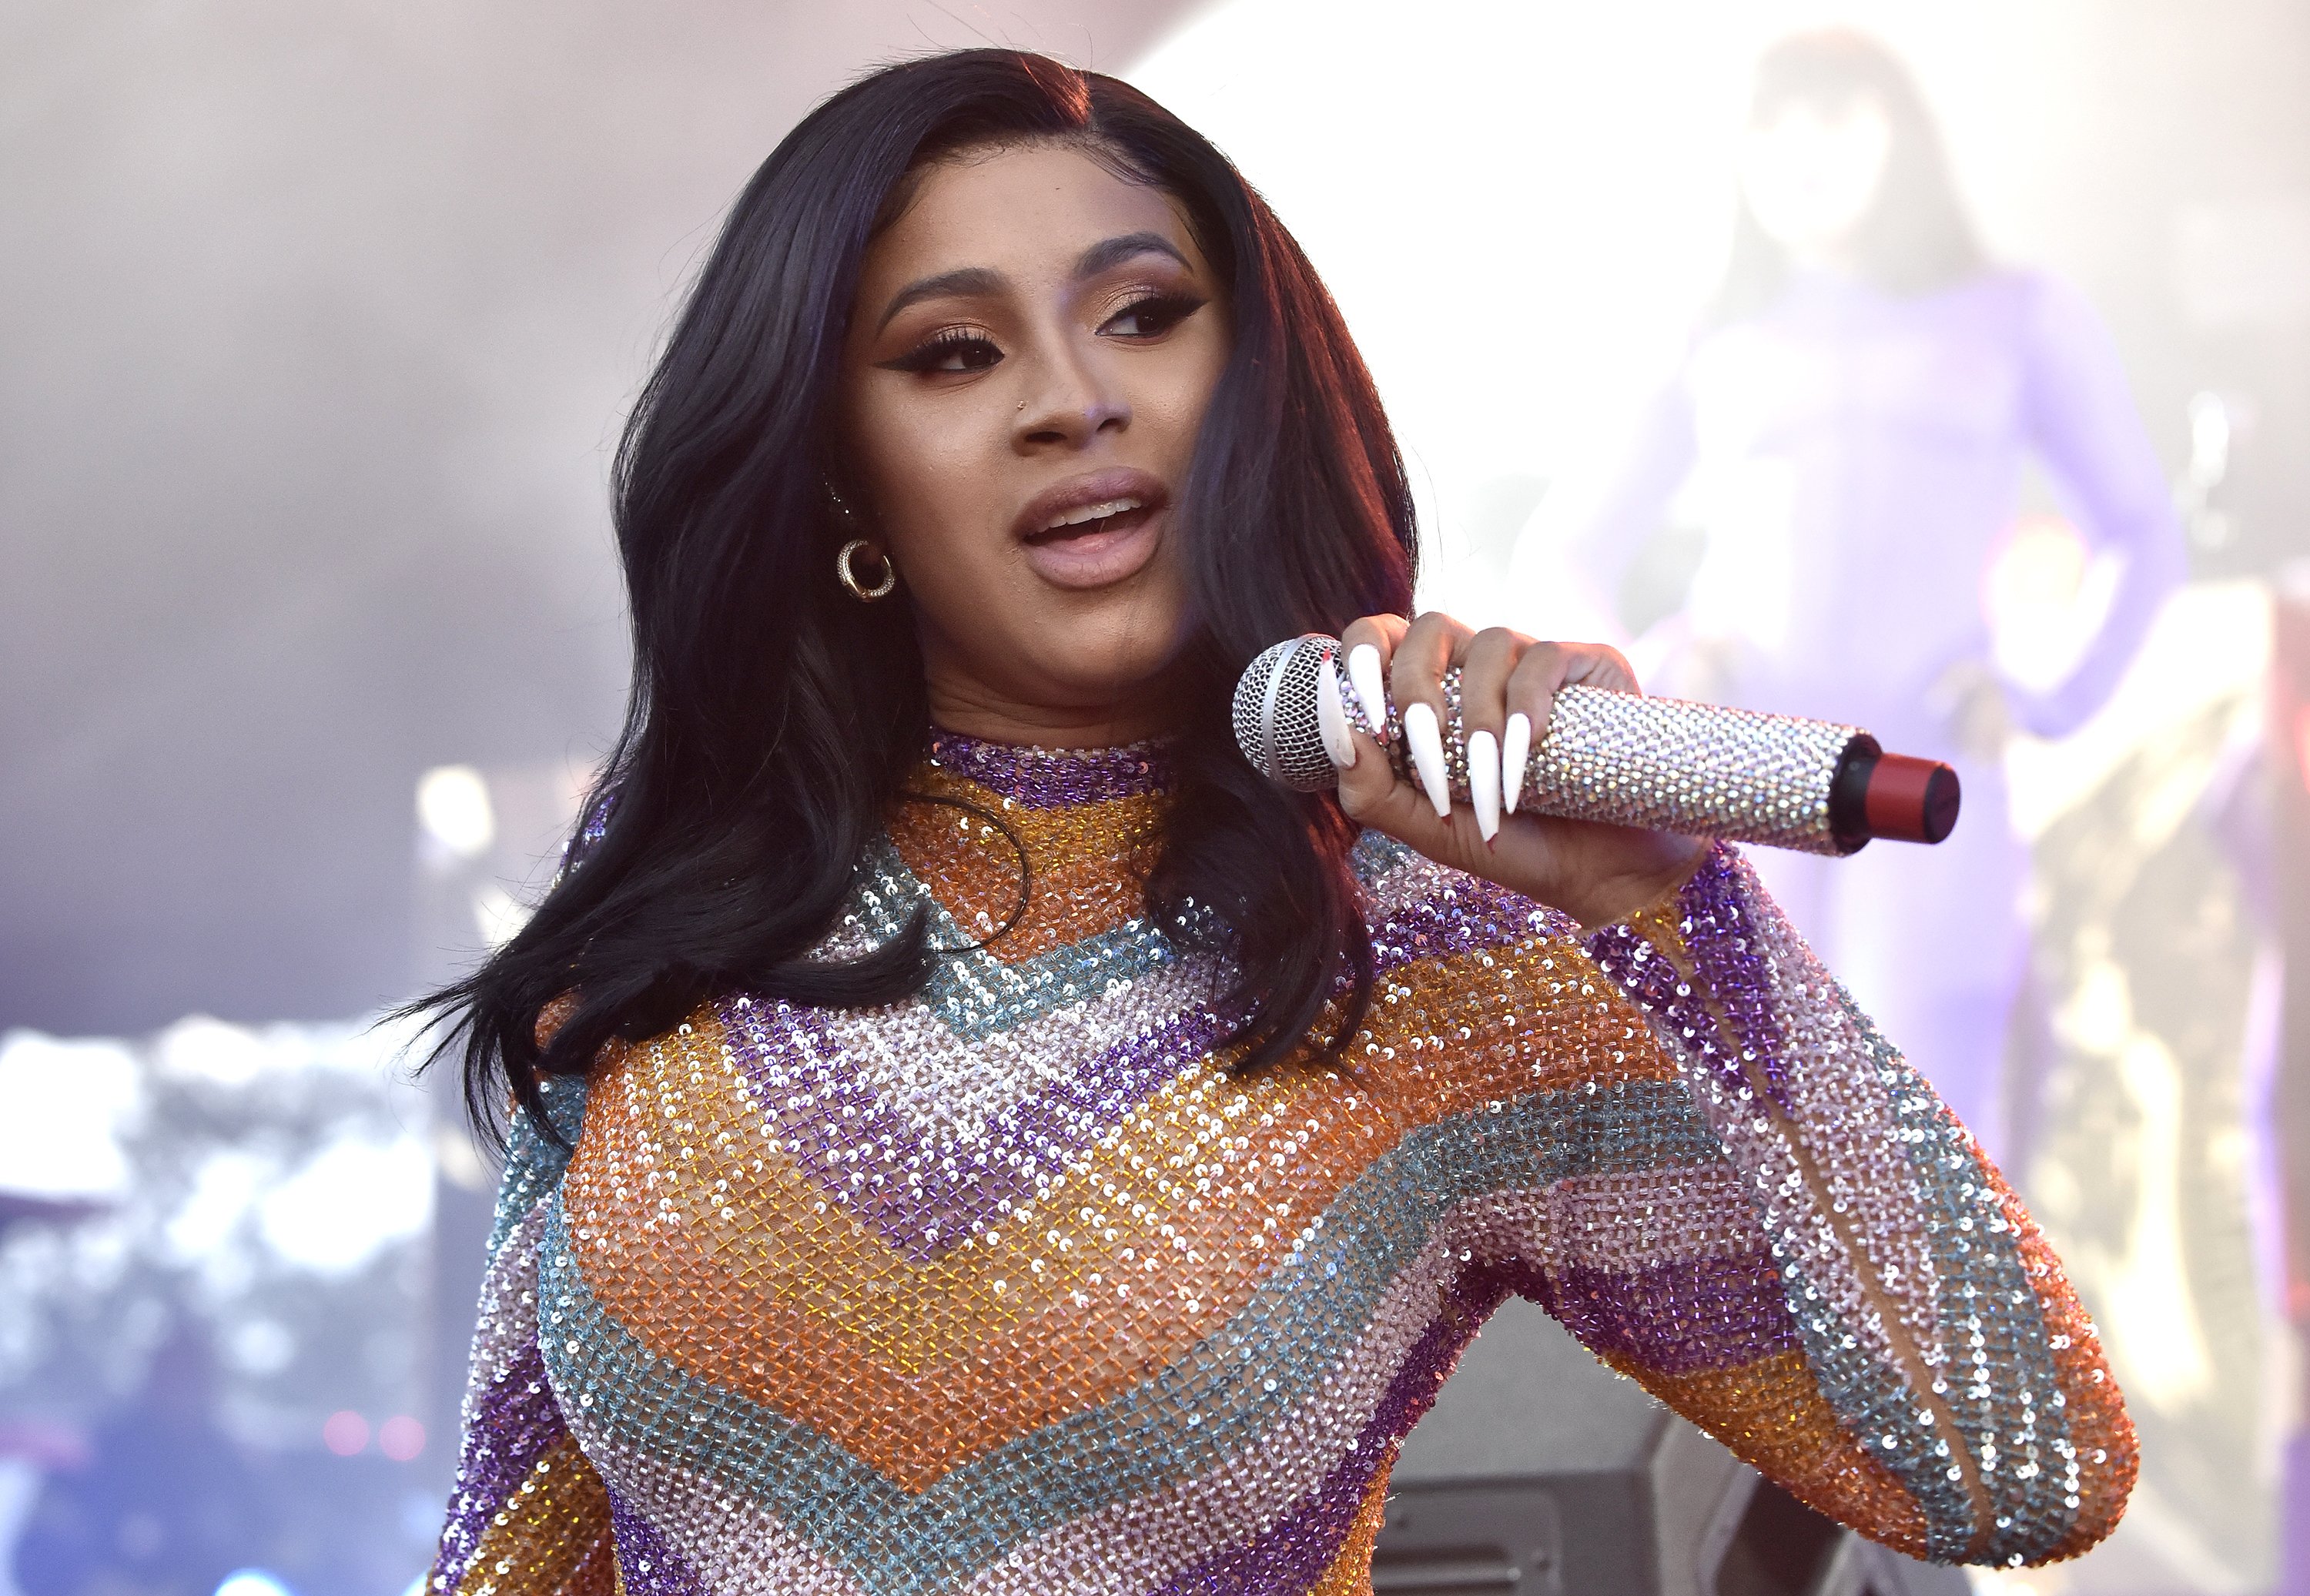 Cardi B performing at the 2019 Bonnaroo Music & Arts Festival on June 16, 2019 in Manchester, Tennessee. | Source: Getty Images